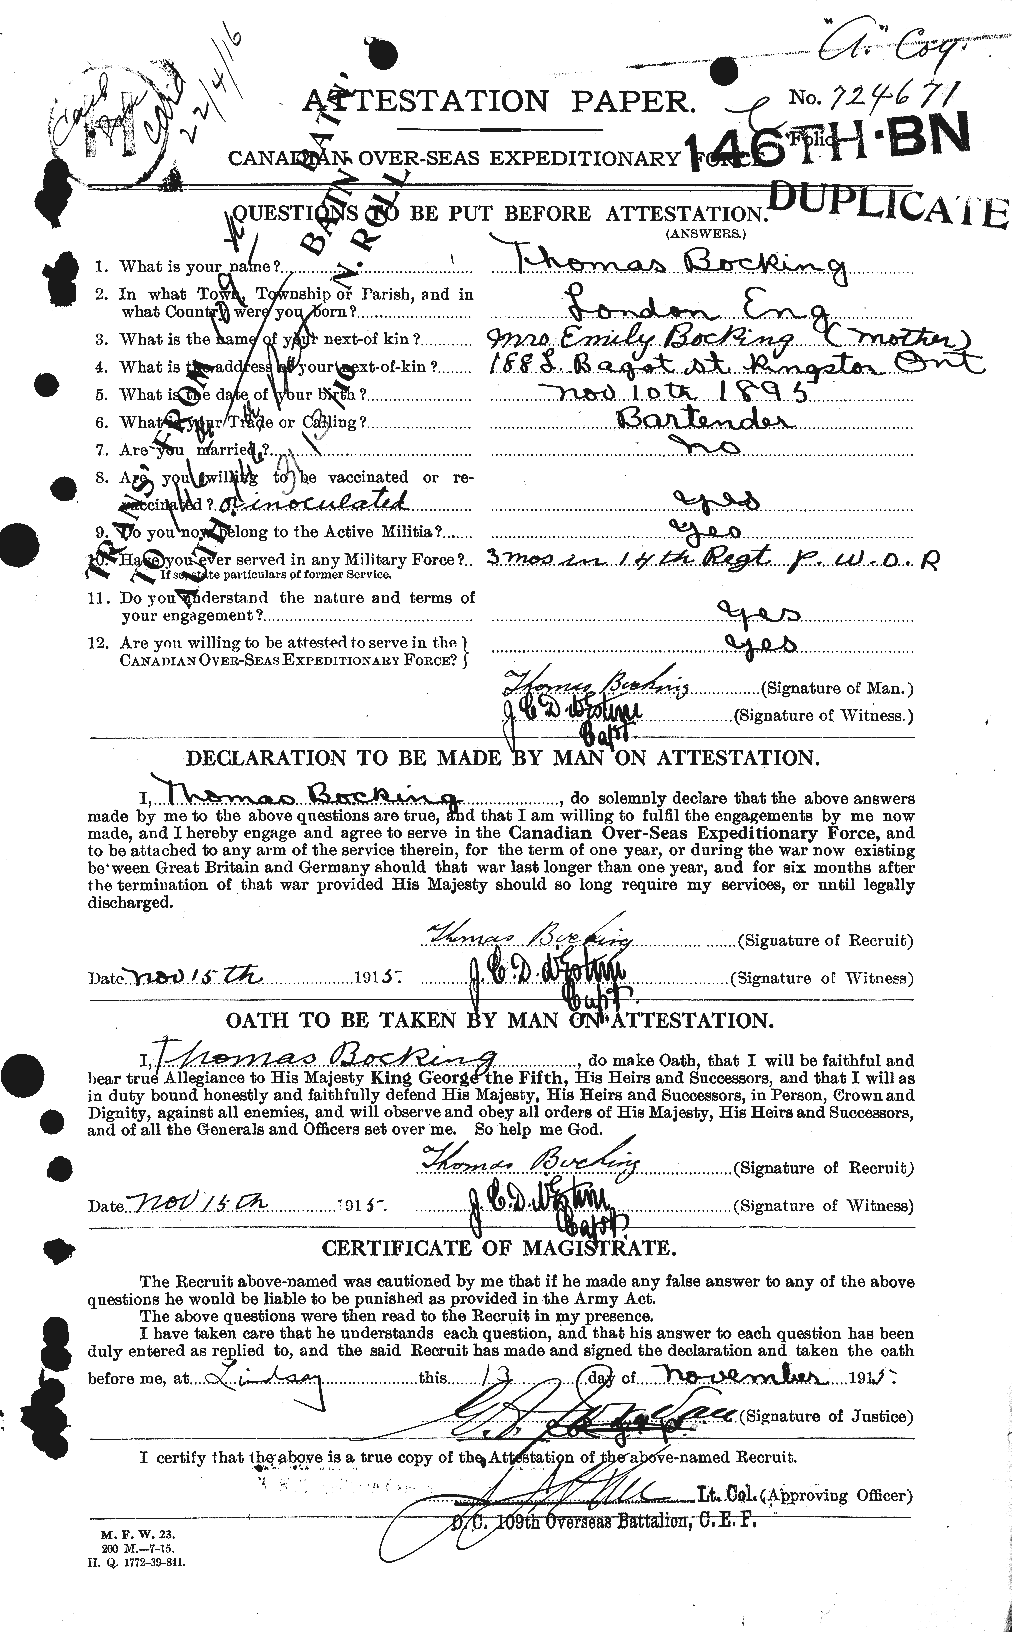 Personnel Records of the First World War - CEF 245288a